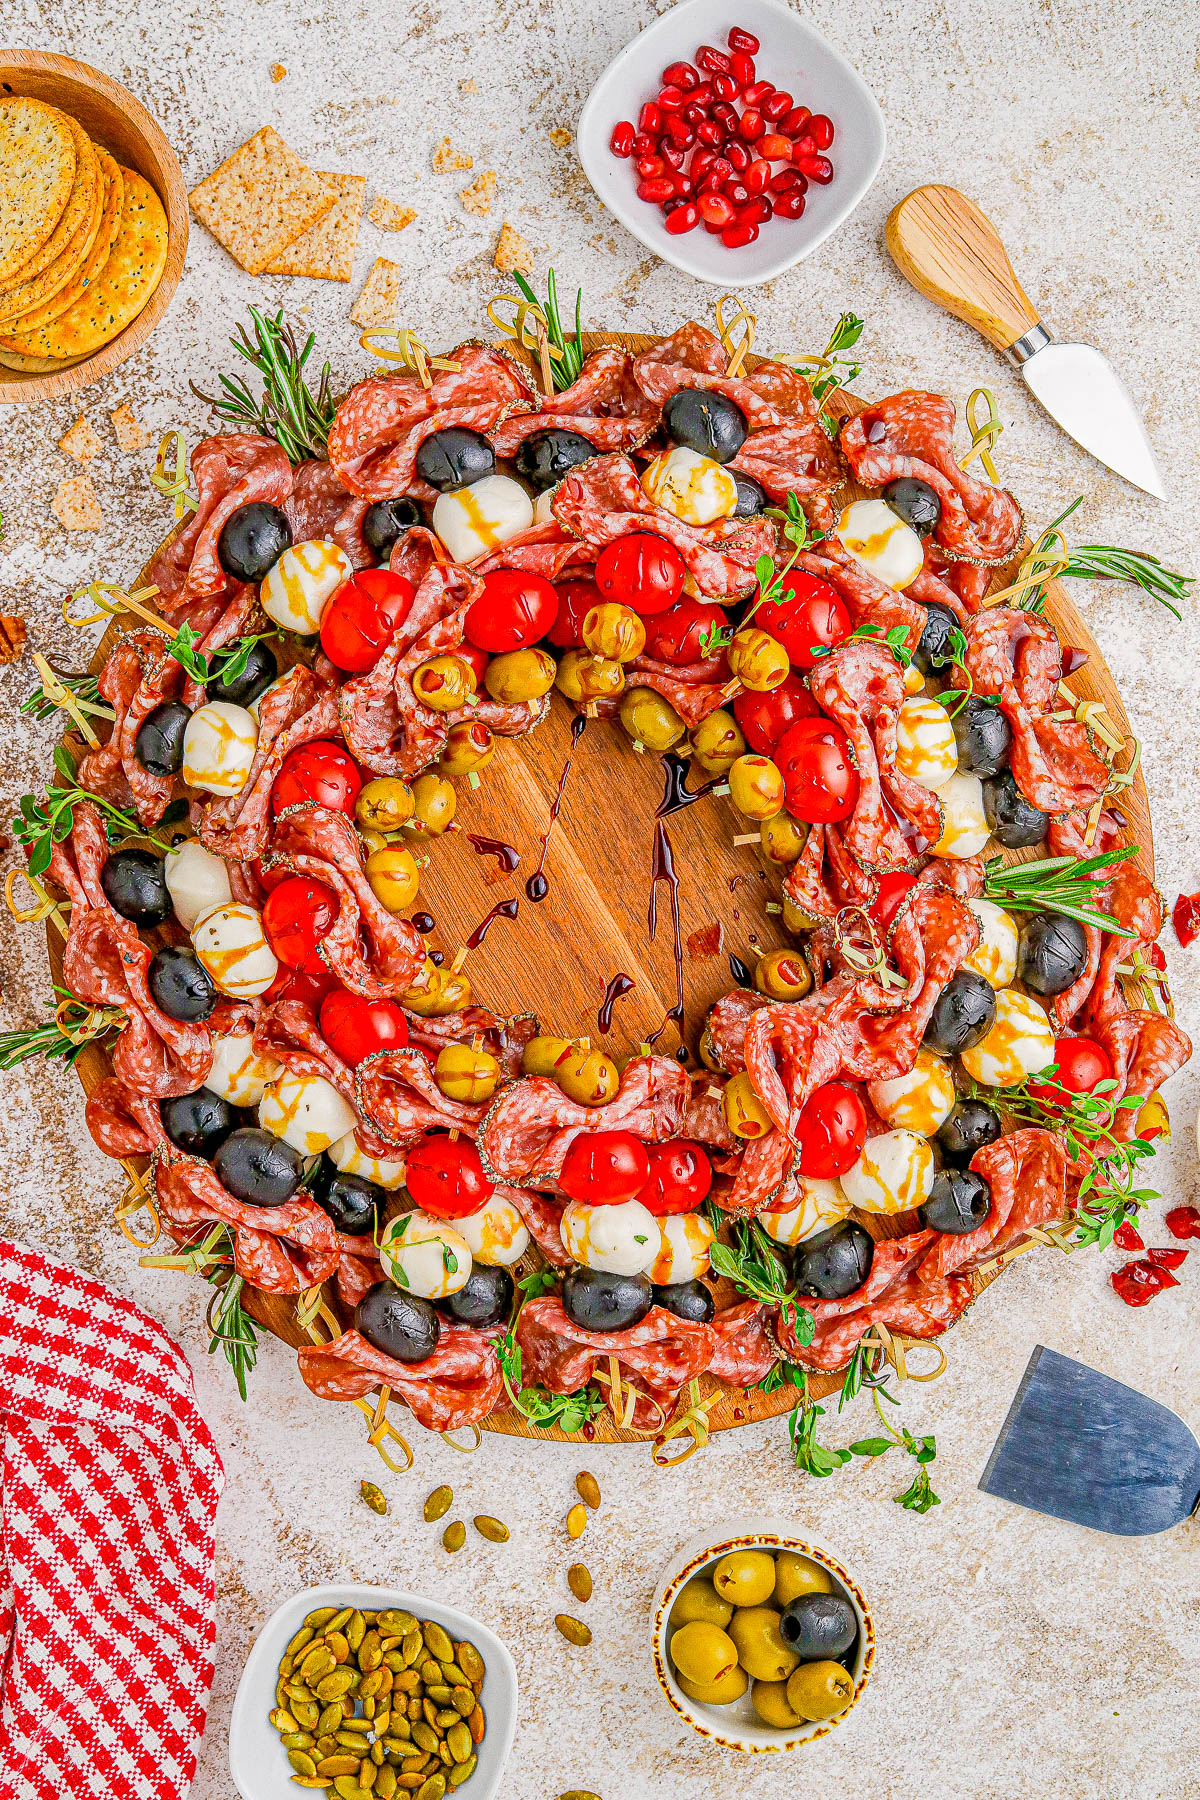 Holiday Antipasto Wreath - A fun and festive Christmas or New Year's Eve appetizer recipe idea that's so FAST and EASY to make! Skewered salami, mozzarella, tomatoes, olives, fresh herbs, and more come together to form the wreath. Mix-and-match the ingredients based on your favorites. You can prep it ahead of your party or event and when your guests see this, I guarantee everyone's eyes will light up!